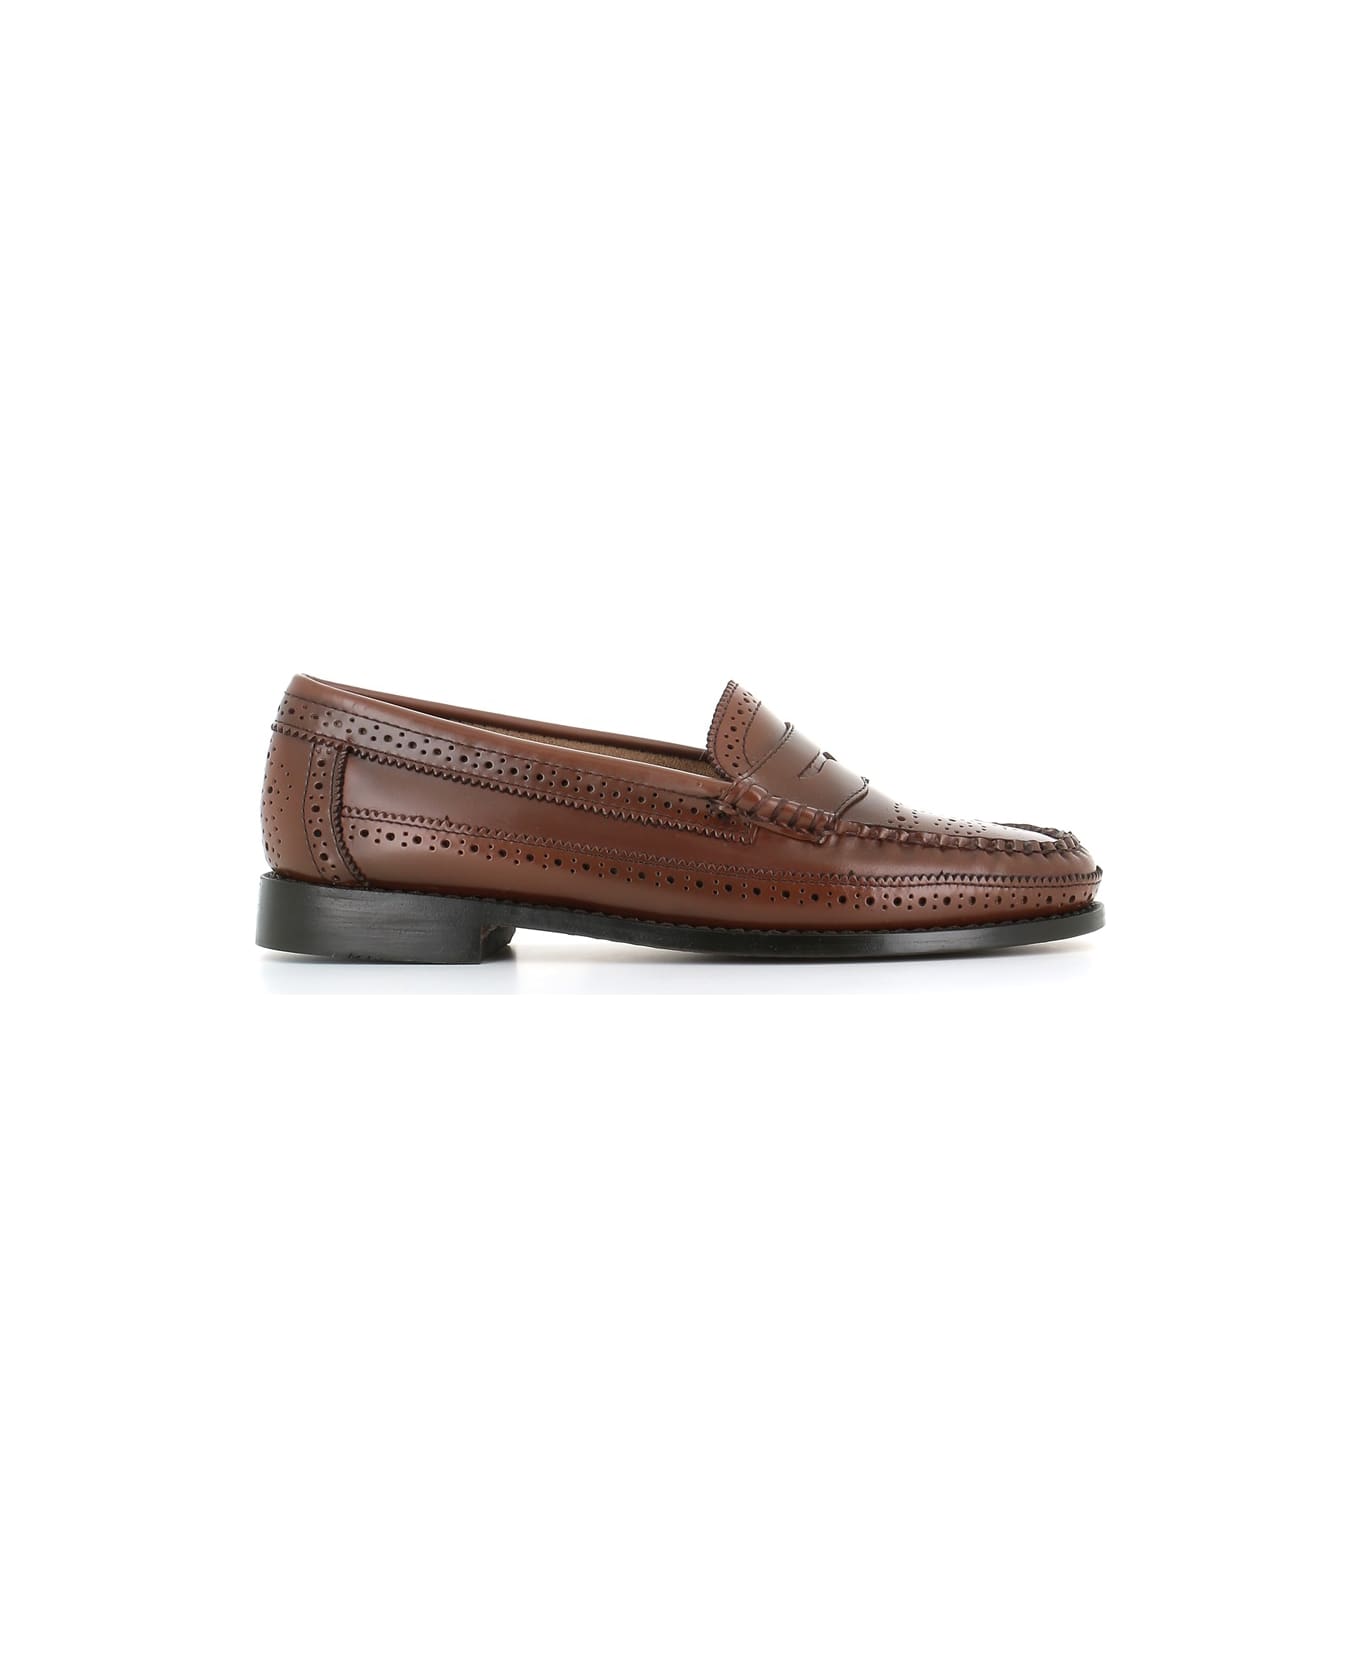 G.H.Bass & Co. Penny Brogues Loafer - Cognac フラットシューズ